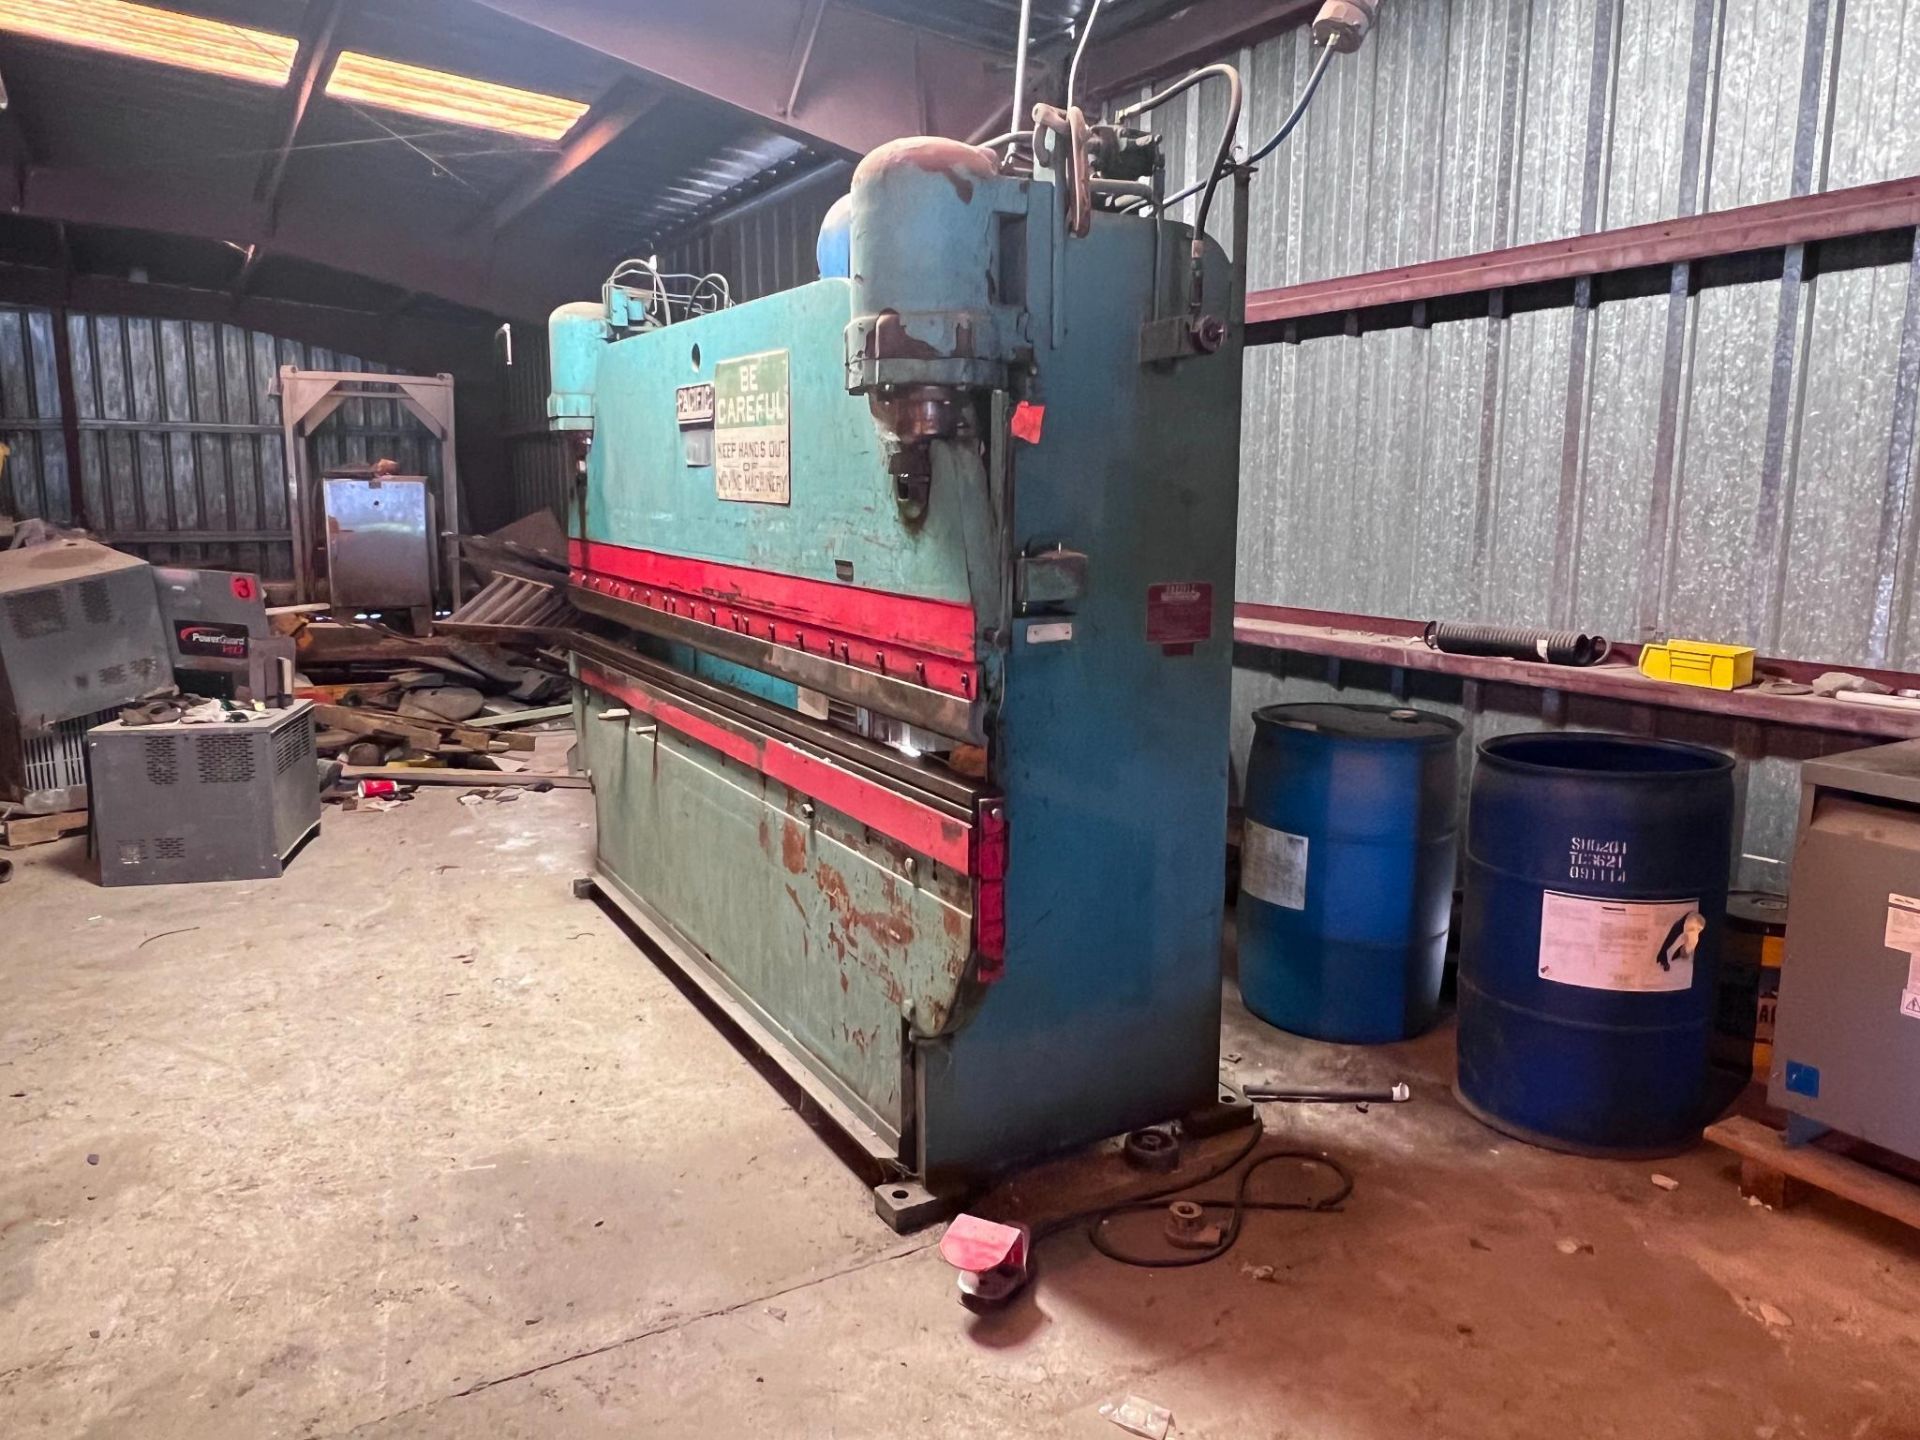 Pacific 70-10 Hydraulic Press Brake Serial Number 7117*. Tonnage: 70 Bed Length: 10' Distance Betwee